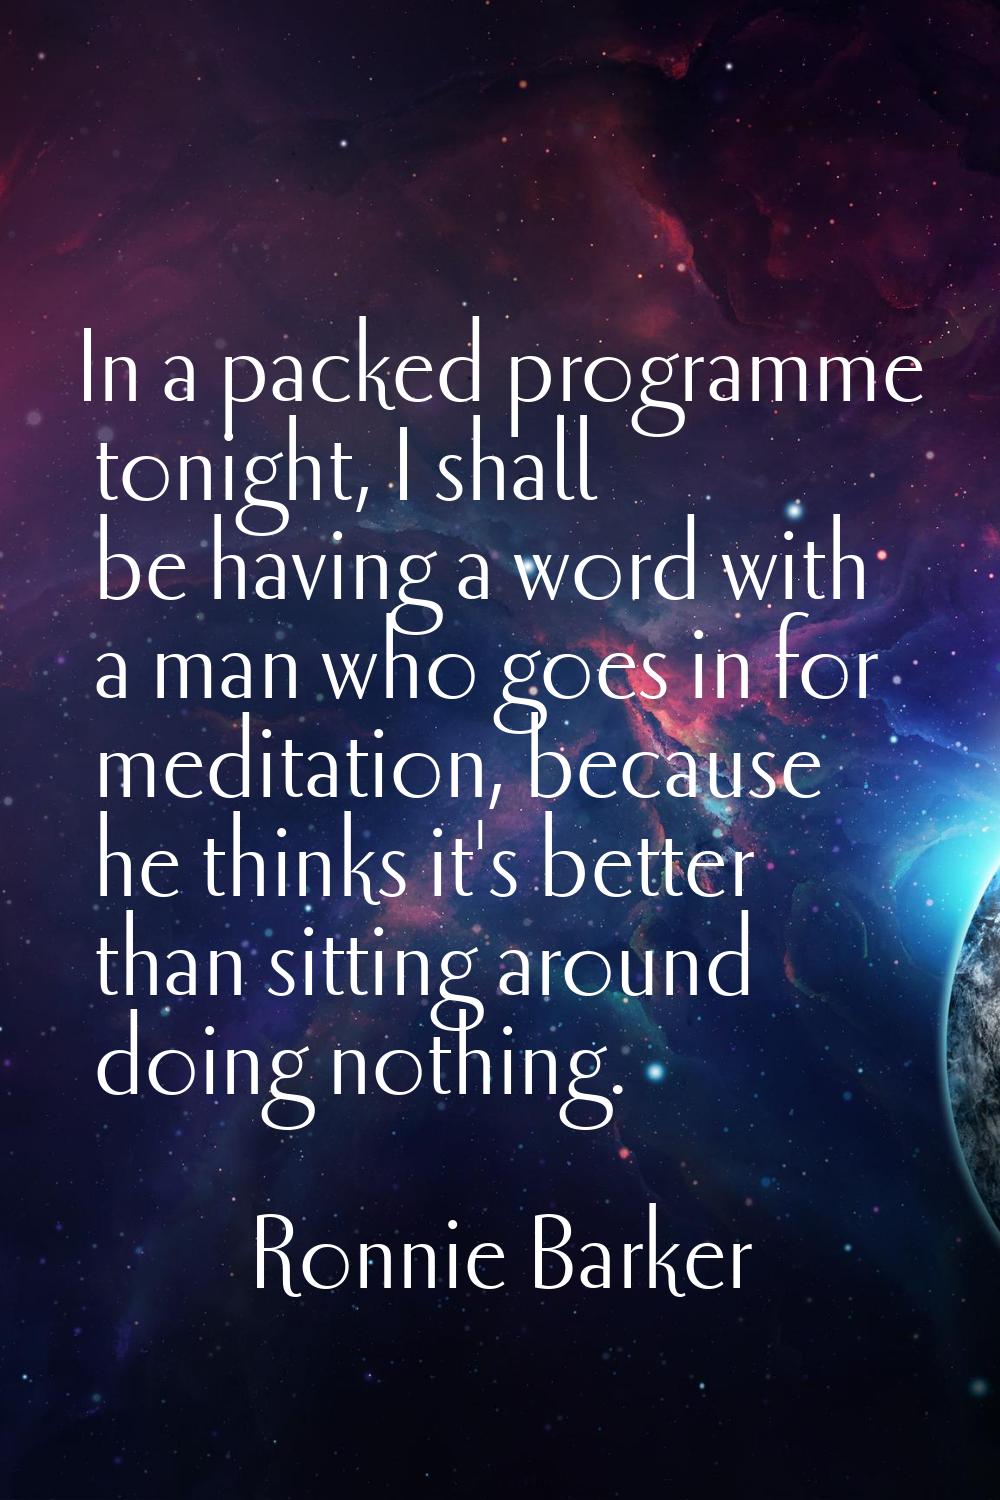 In a packed programme tonight, I shall be having a word with a man who goes in for meditation, beca